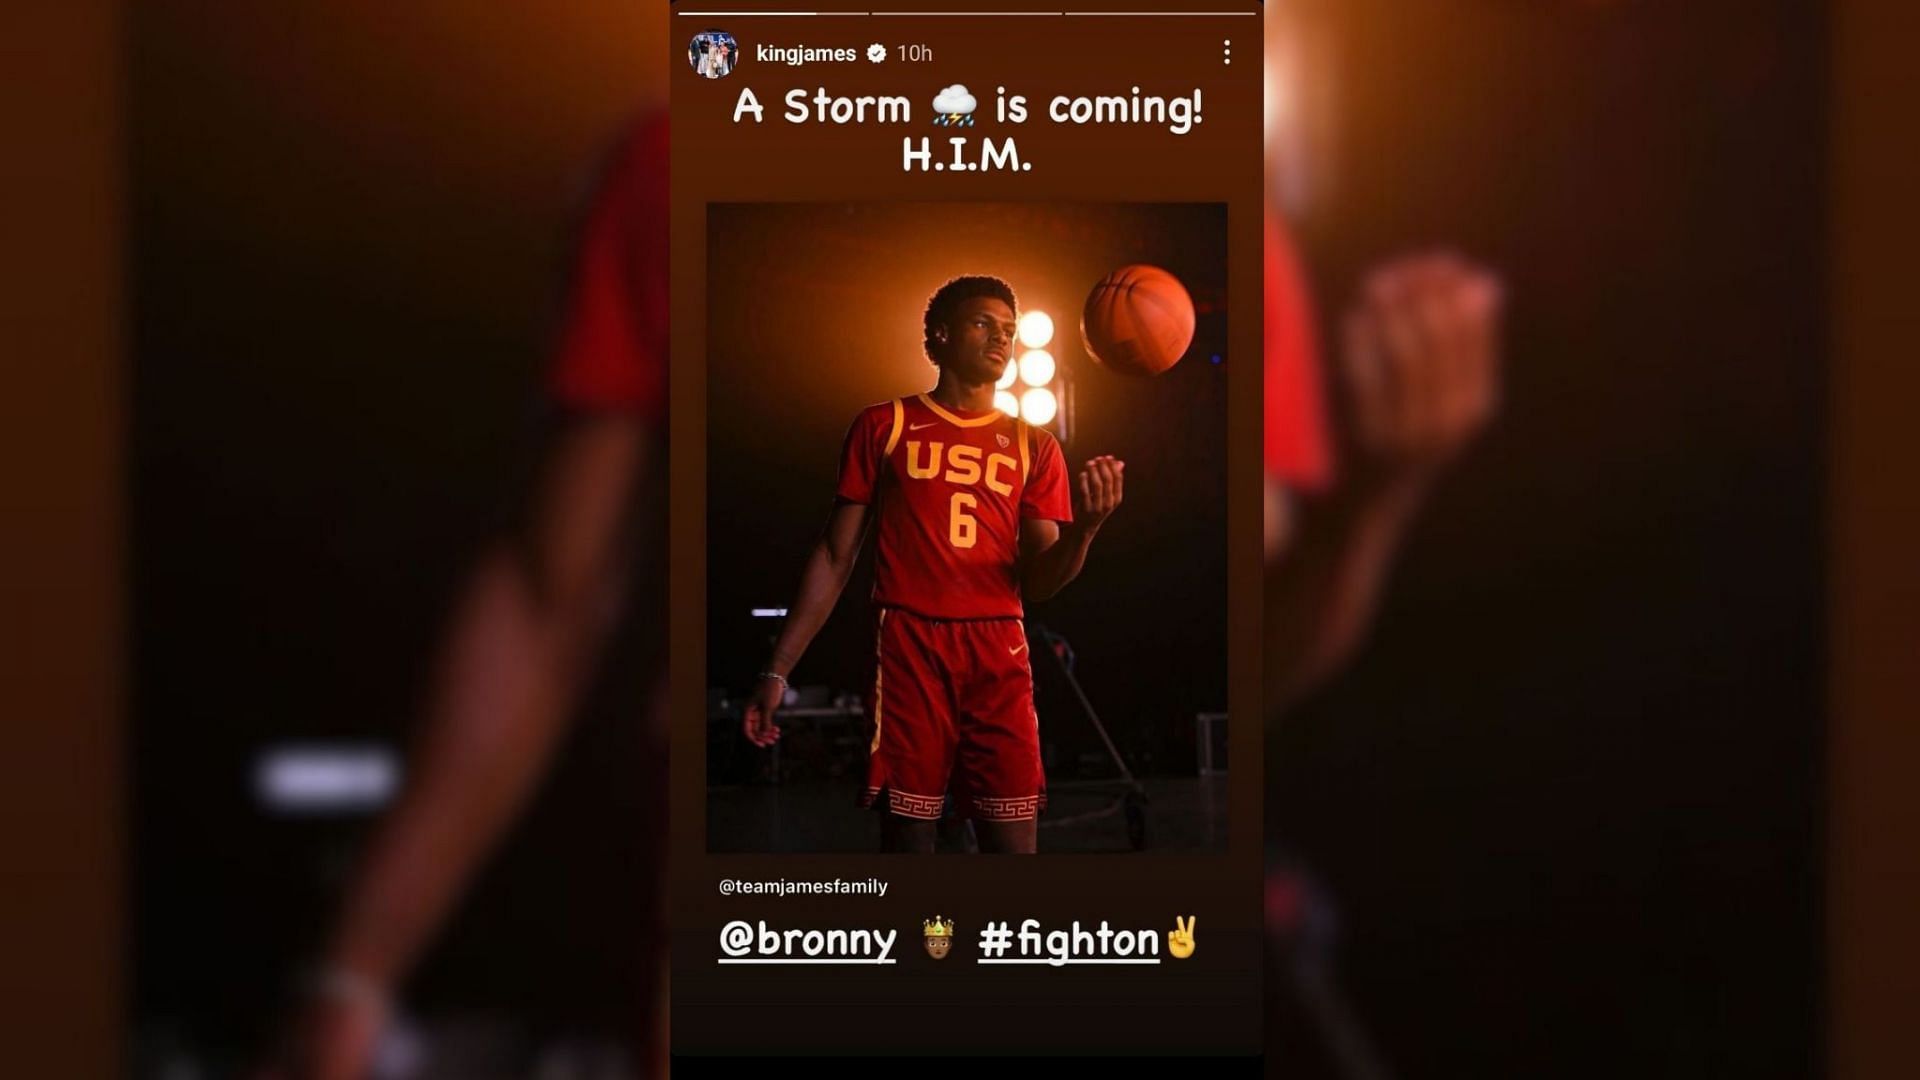 LeBron James shared a photo of Bronny wearing USC threads.